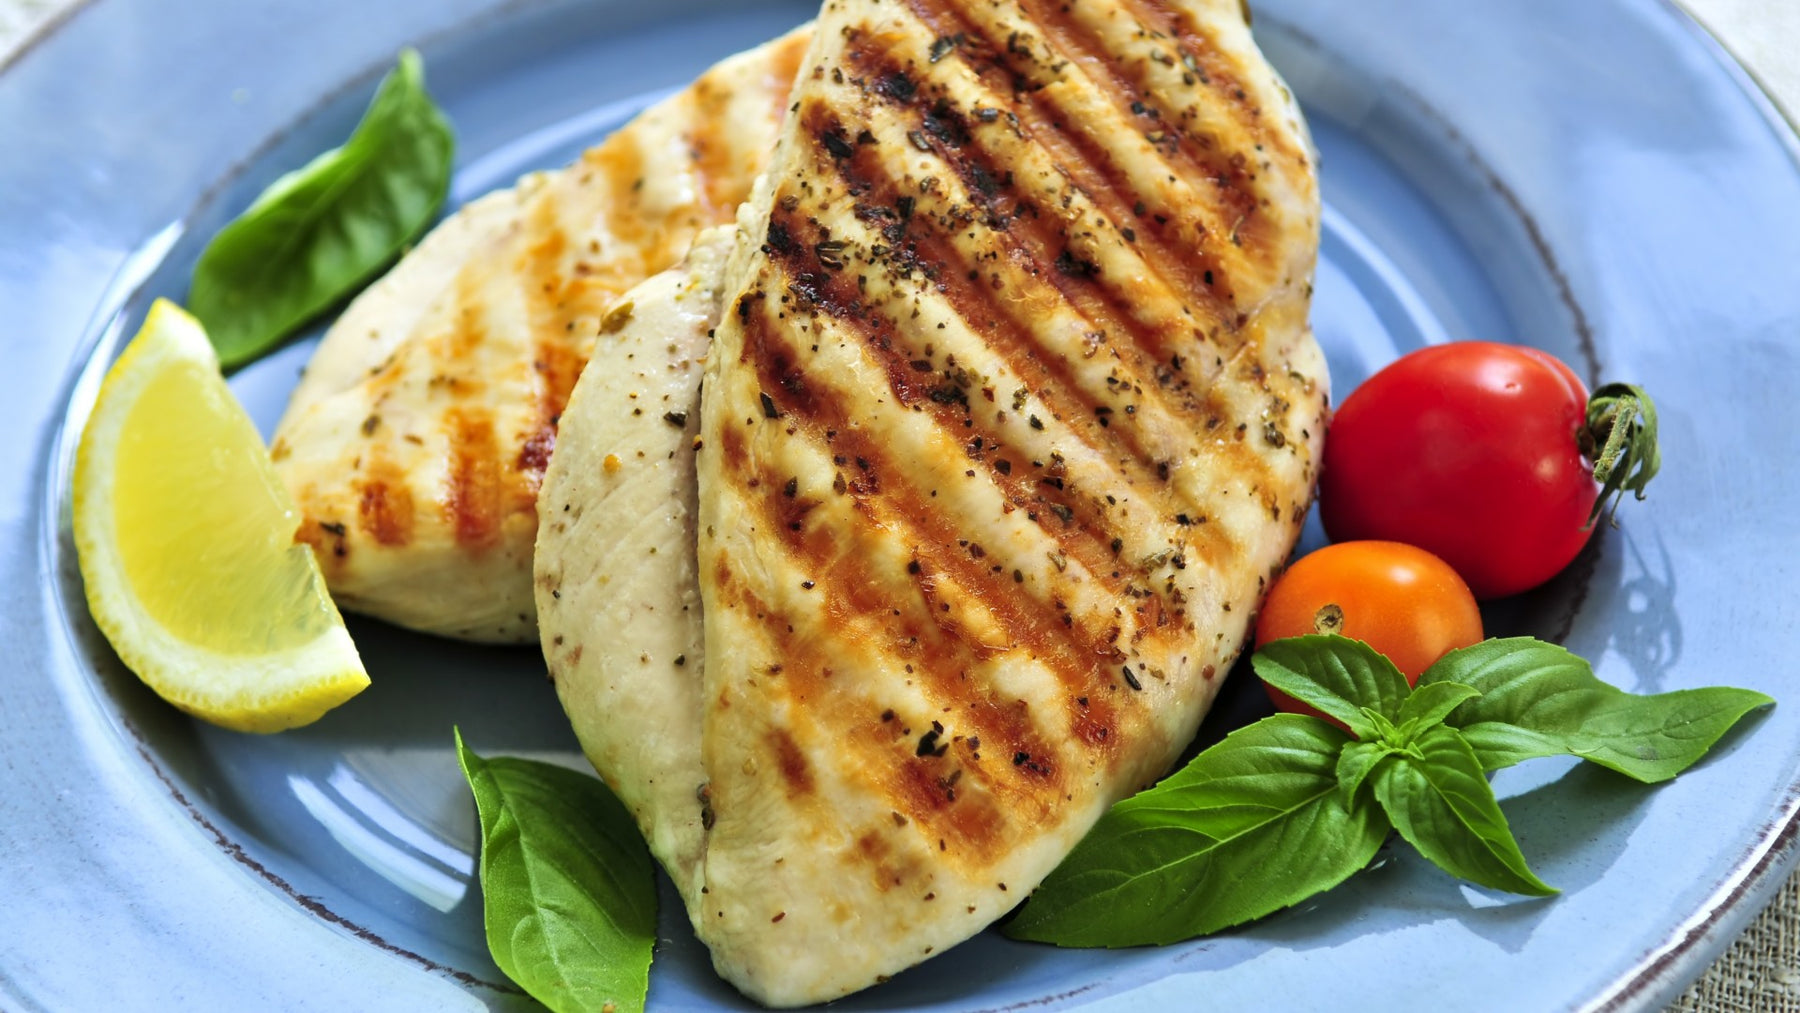 How Many Calories in a Chicken Breast?